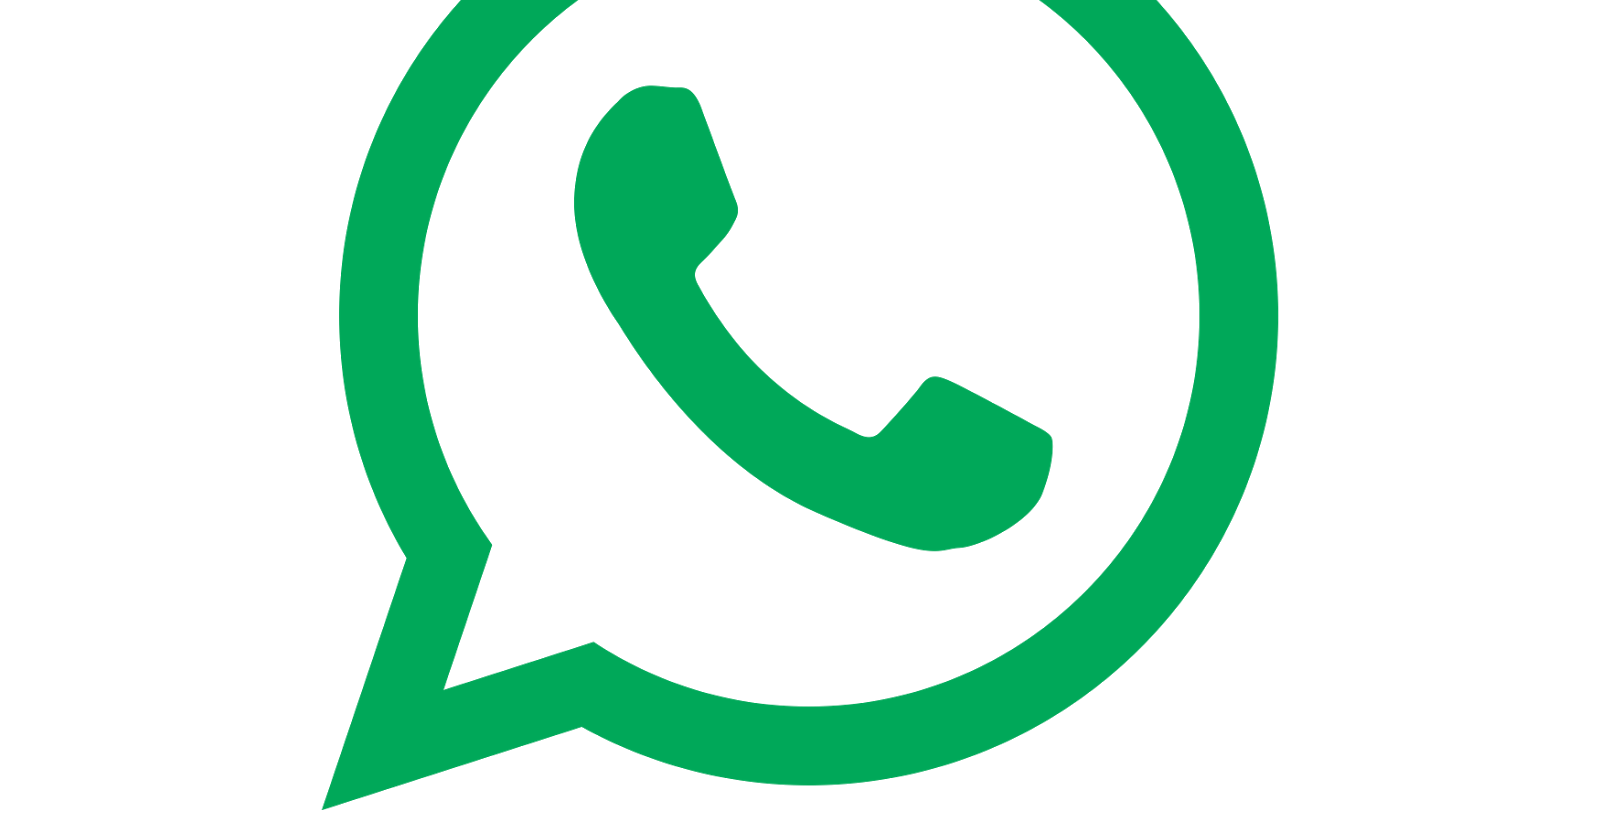 Automating WhatsApp web with alright